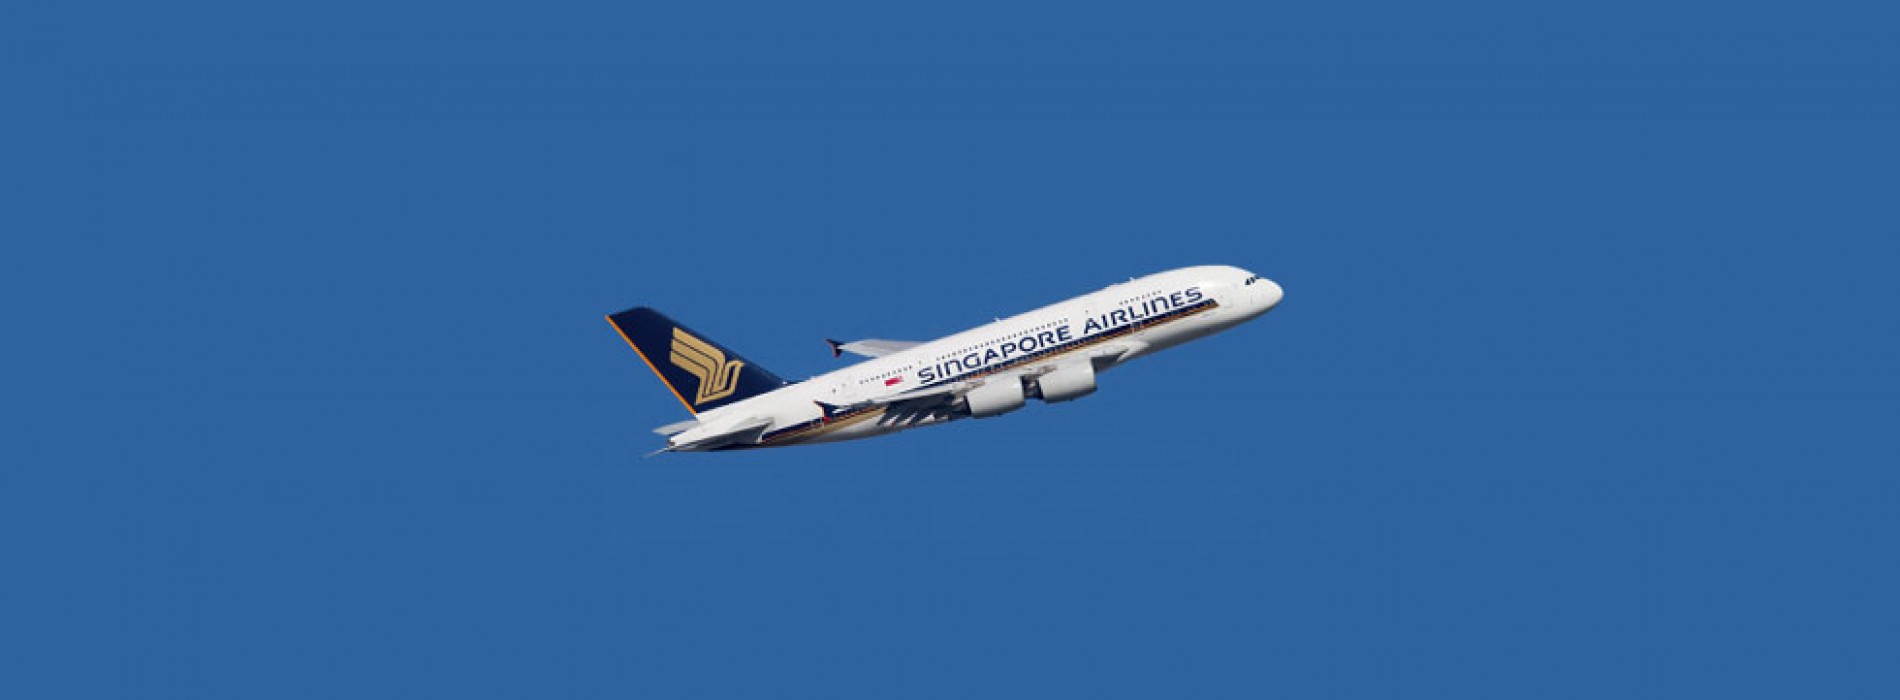 Singapore Airlines to link Canberra and Wellington with new route